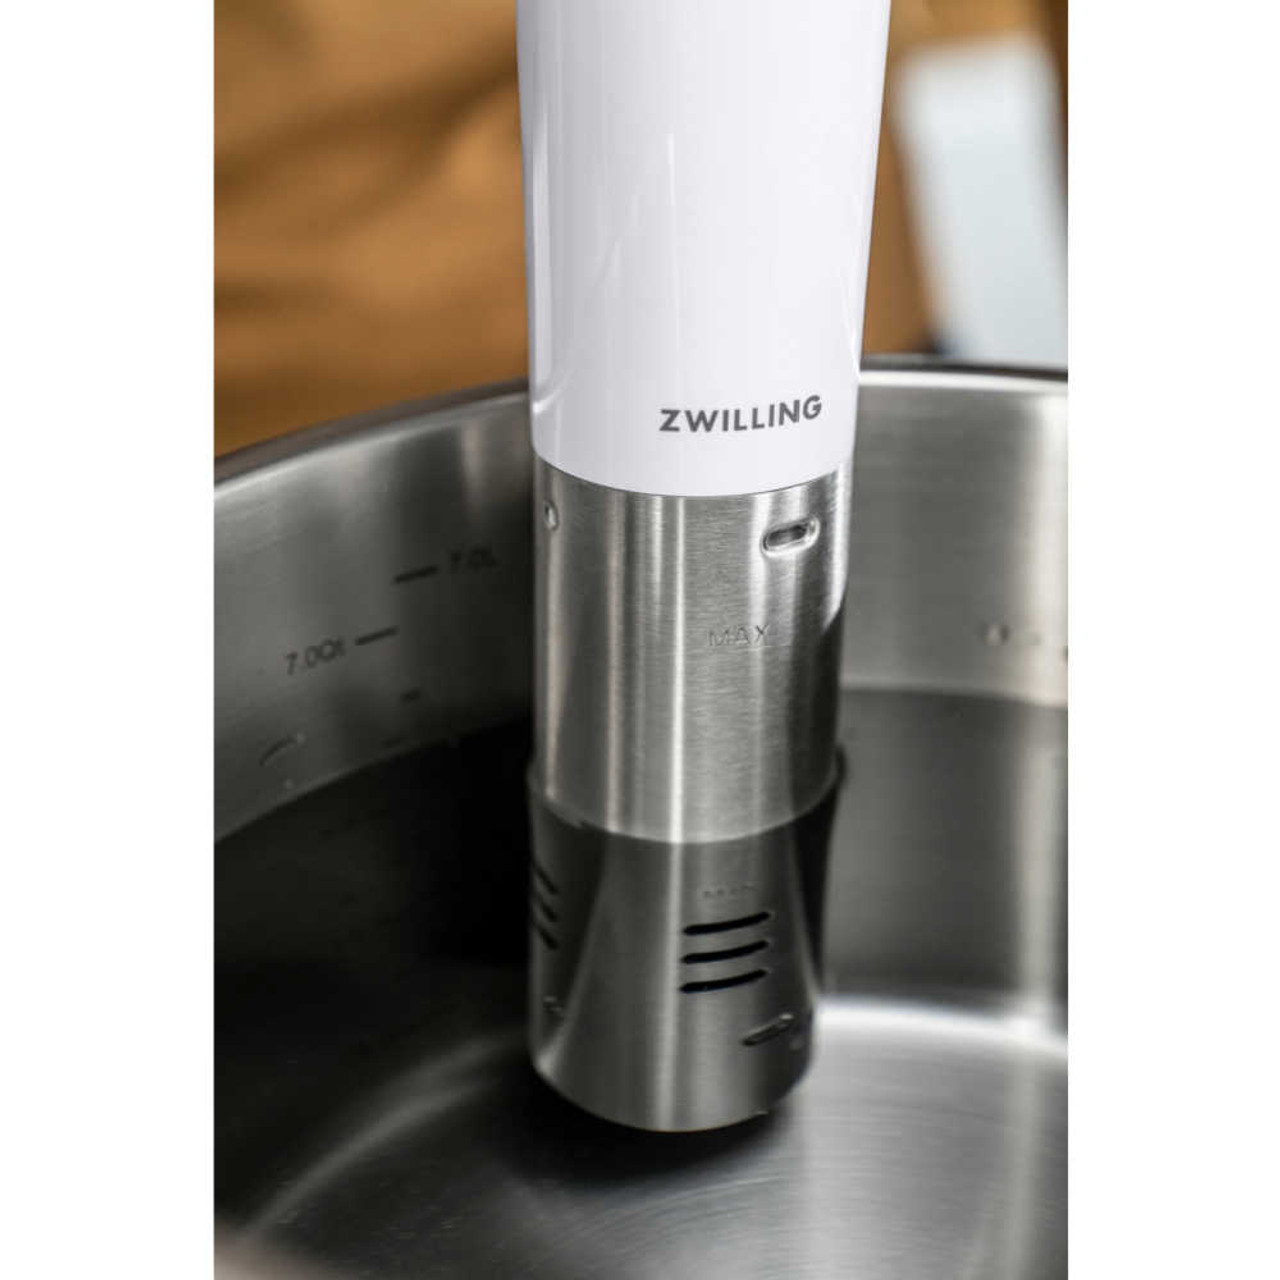 https://cdn11.bigcommerce.com/s-hccytny0od/images/stencil/1280x1280/products/4370/17032/Zwilling_Enfinigy_Sous_Vide_Stick_5__83990.1635376172.jpg?c=2?imbypass=on